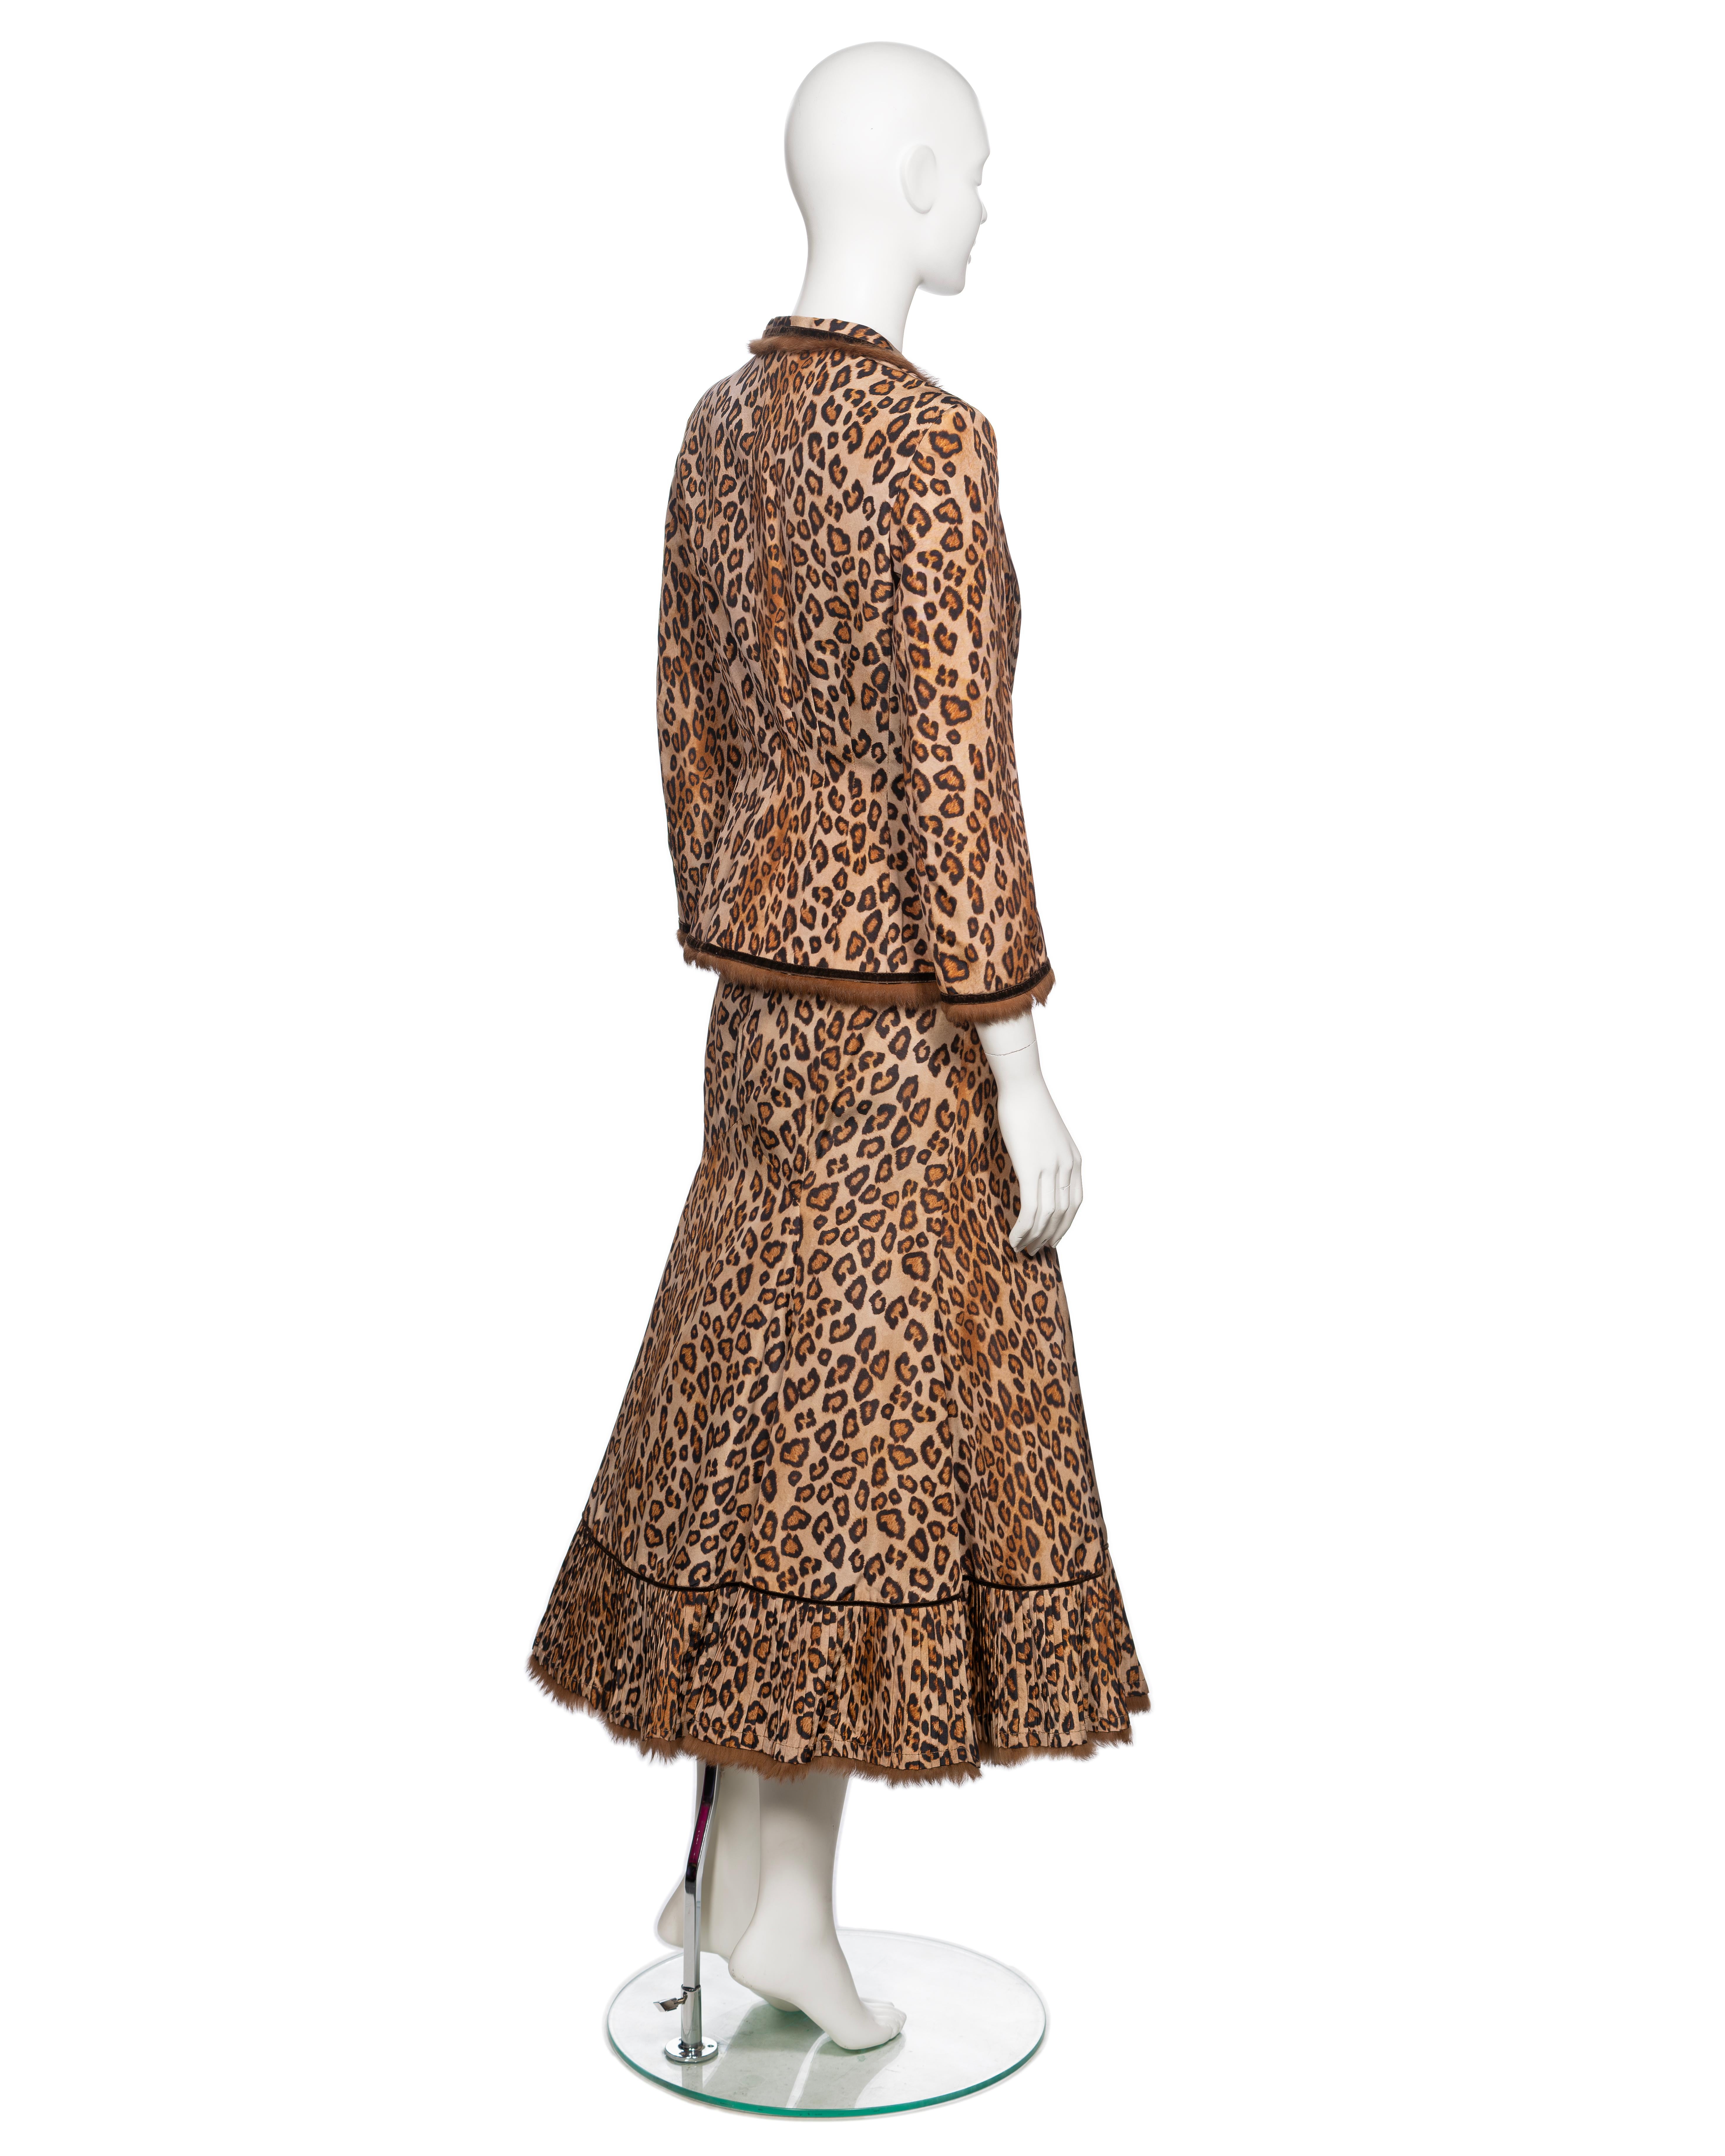 Alexander McQueen Leopard Print Silk and Fur Jacket and Skirt Suit, FW 2005 For Sale 3